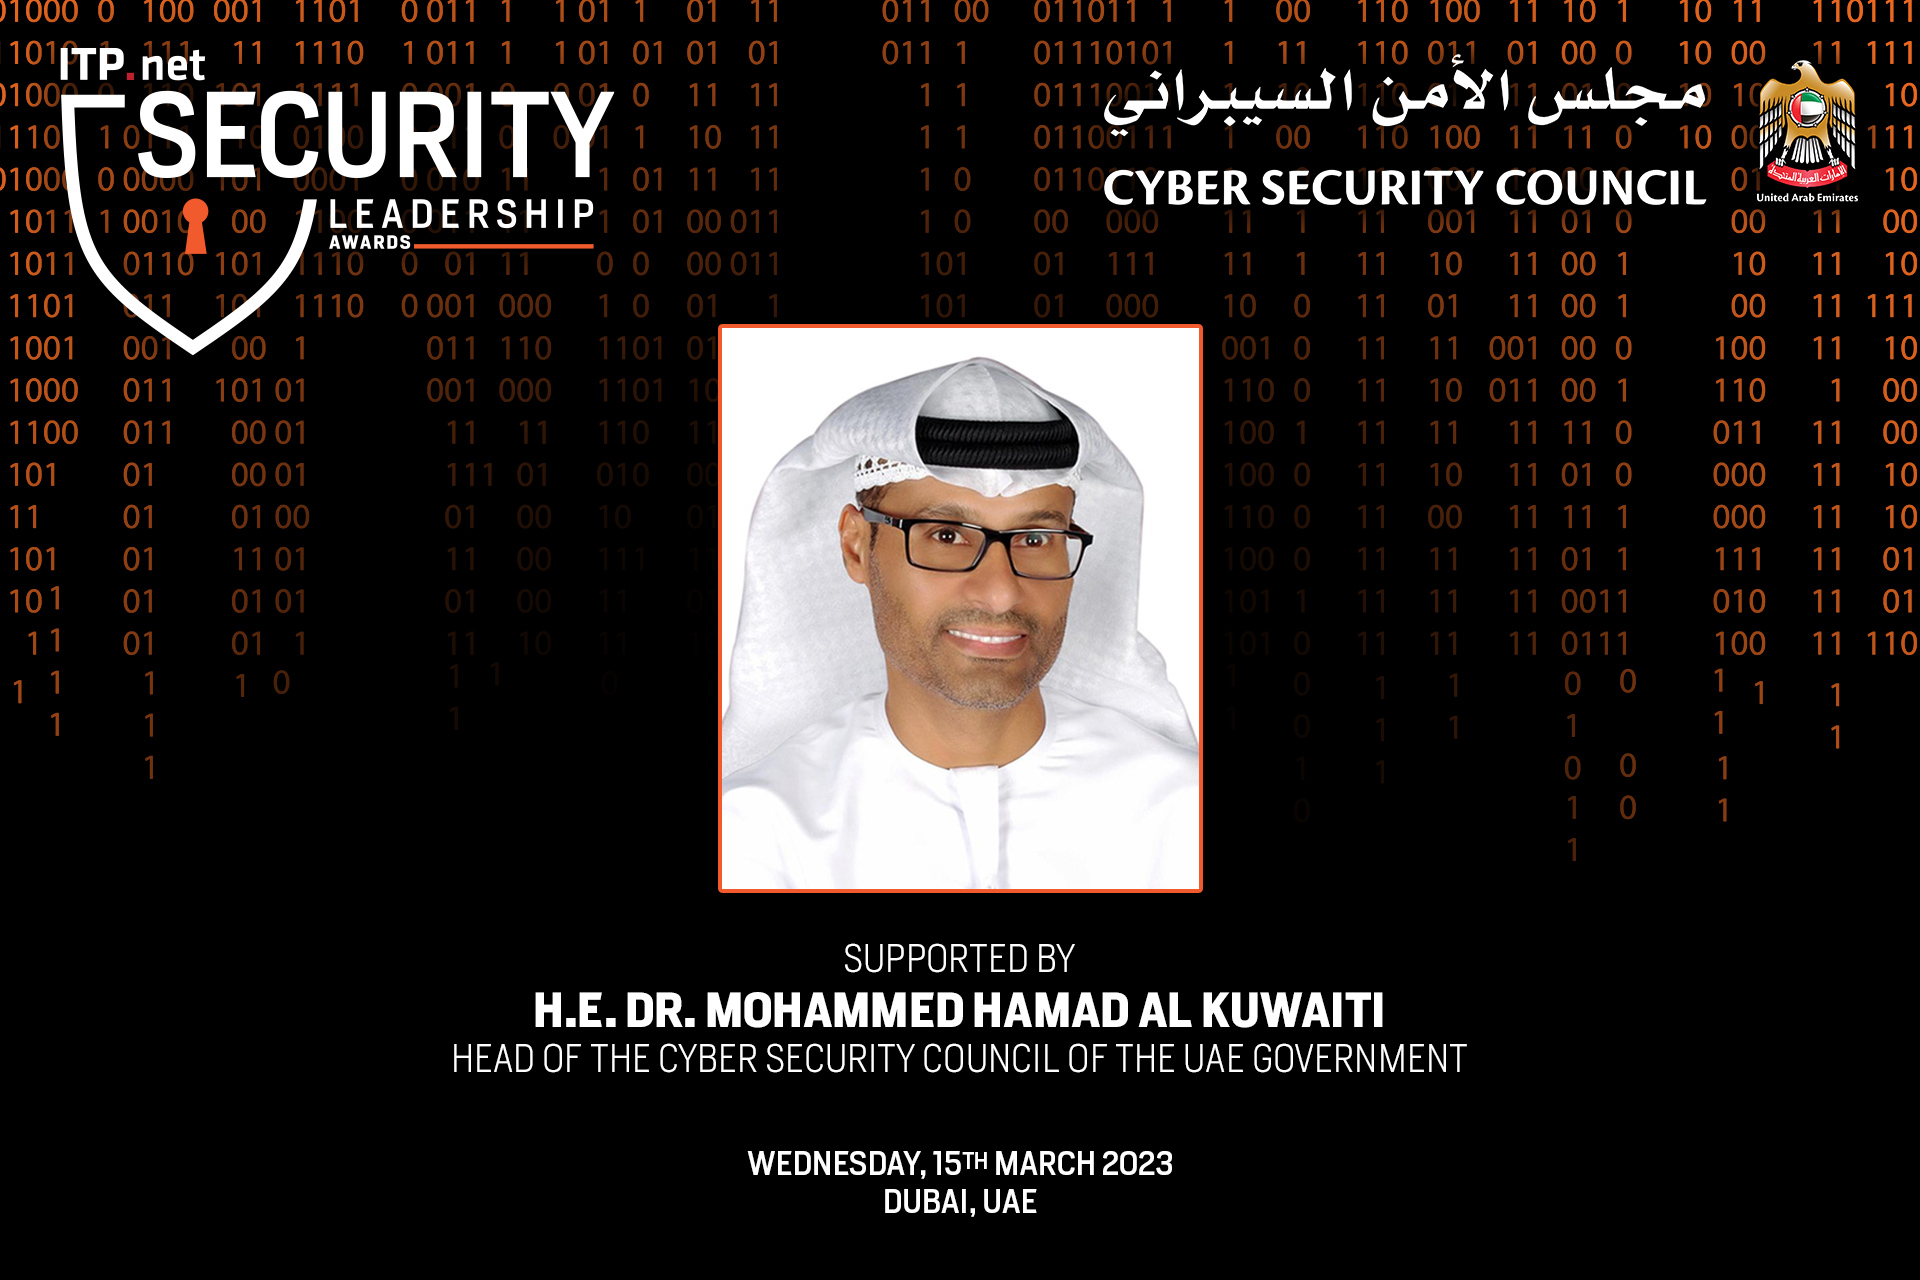 UAE Cybersecurity Council, ITP.net team up to honour security leadership and innovation